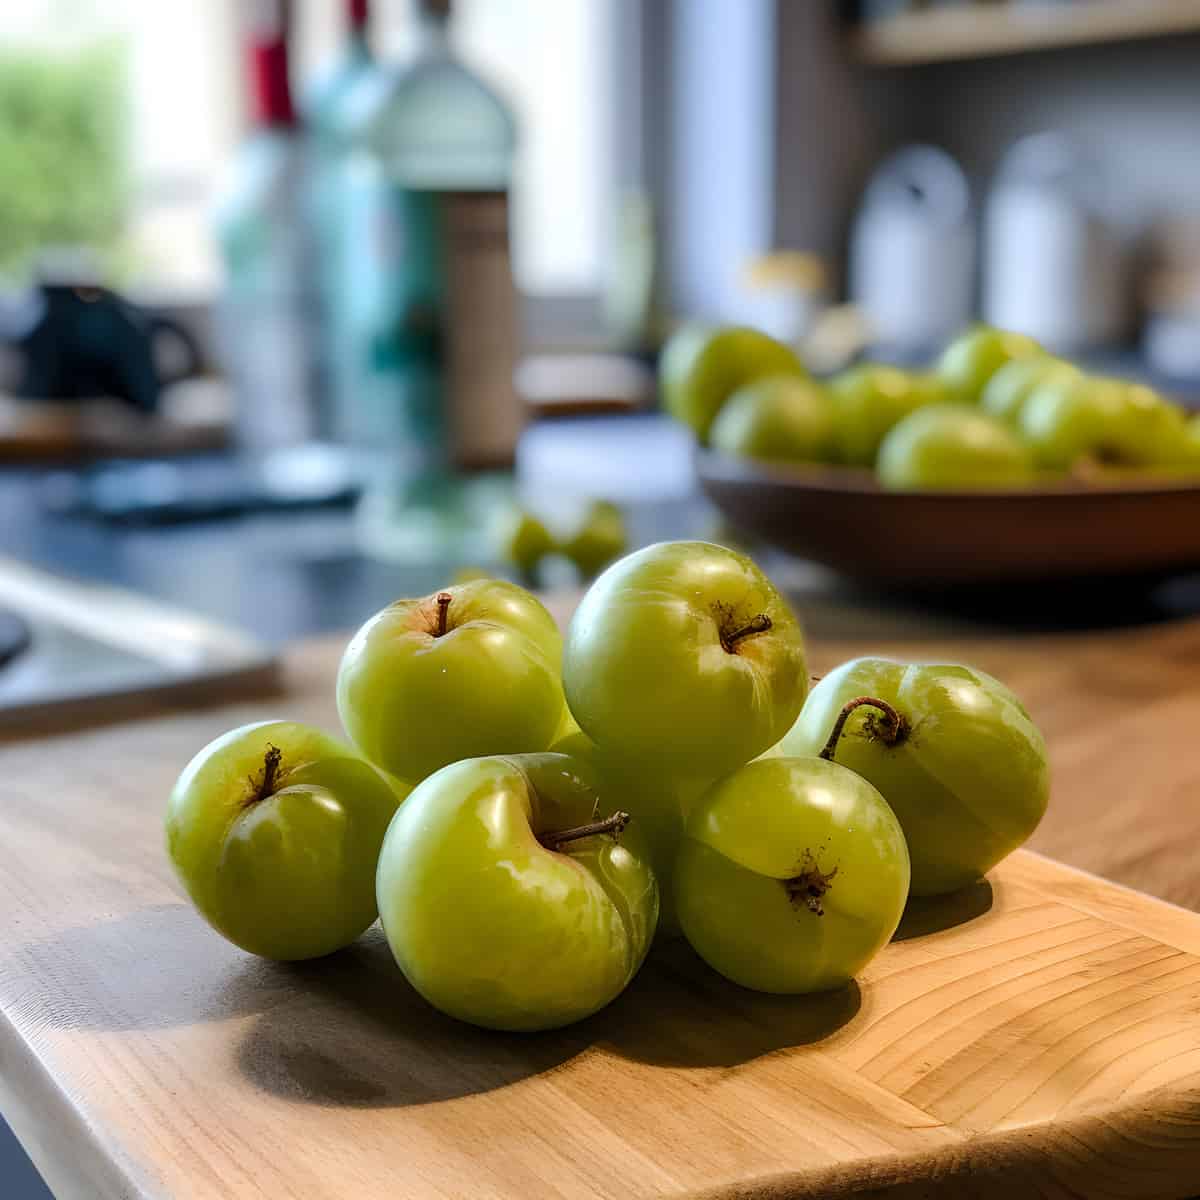 Greengage on a kitchen counter